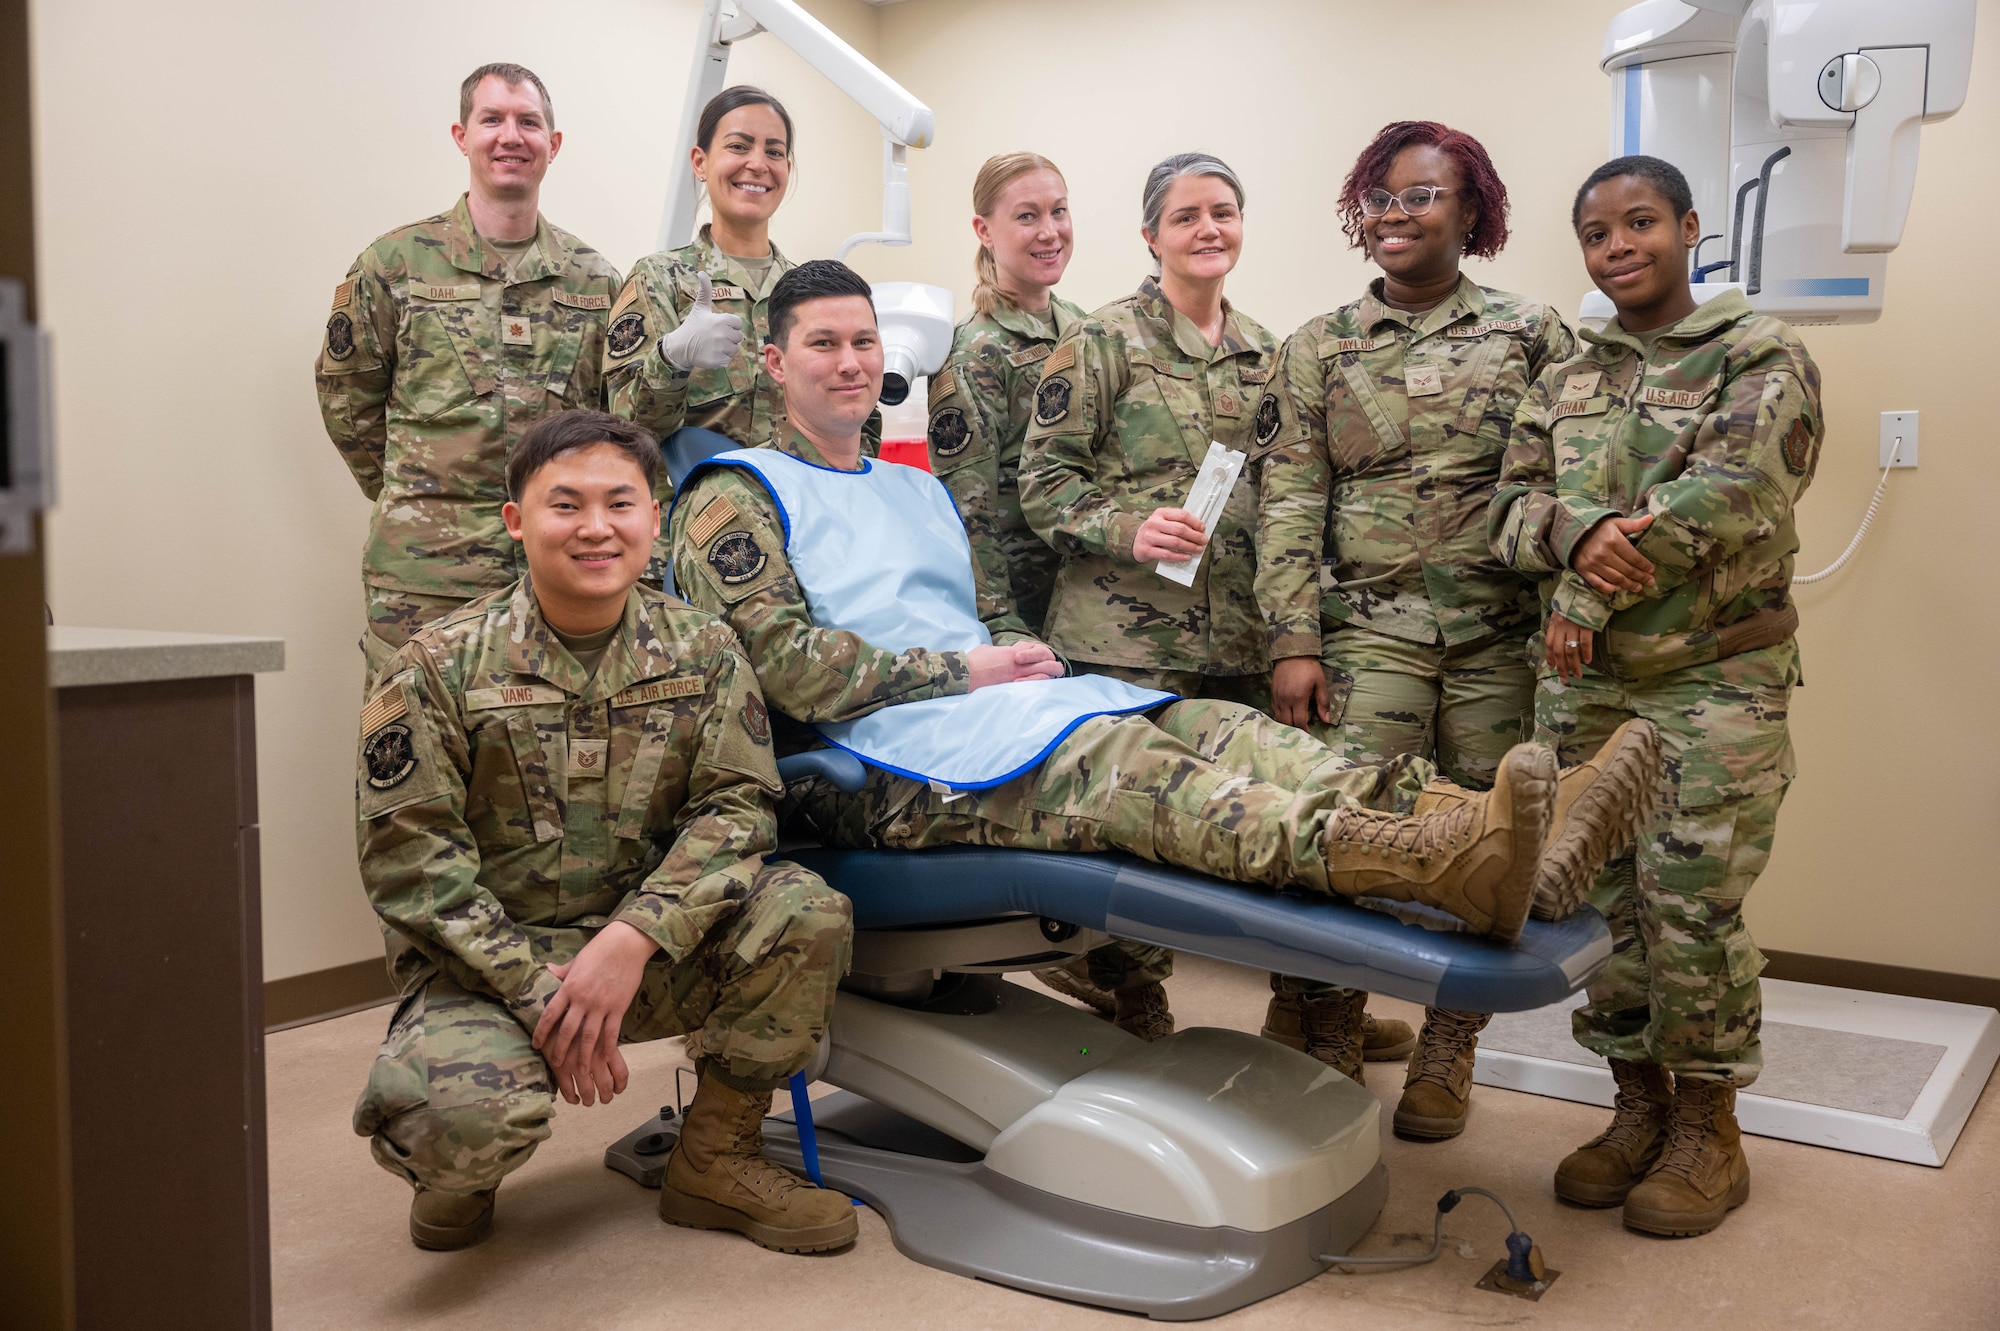 Members of the 934th Aeromedical Staging Squadron dental team poses for a group photo at the Minneapolis-Saint Paul Air Reserve Station, February 5, 2023. The 934th dental component is a close-knit group composed of dentists and dental assistants.(U.S. Air Force photo by Staff Sgt. Timothy Leddick)